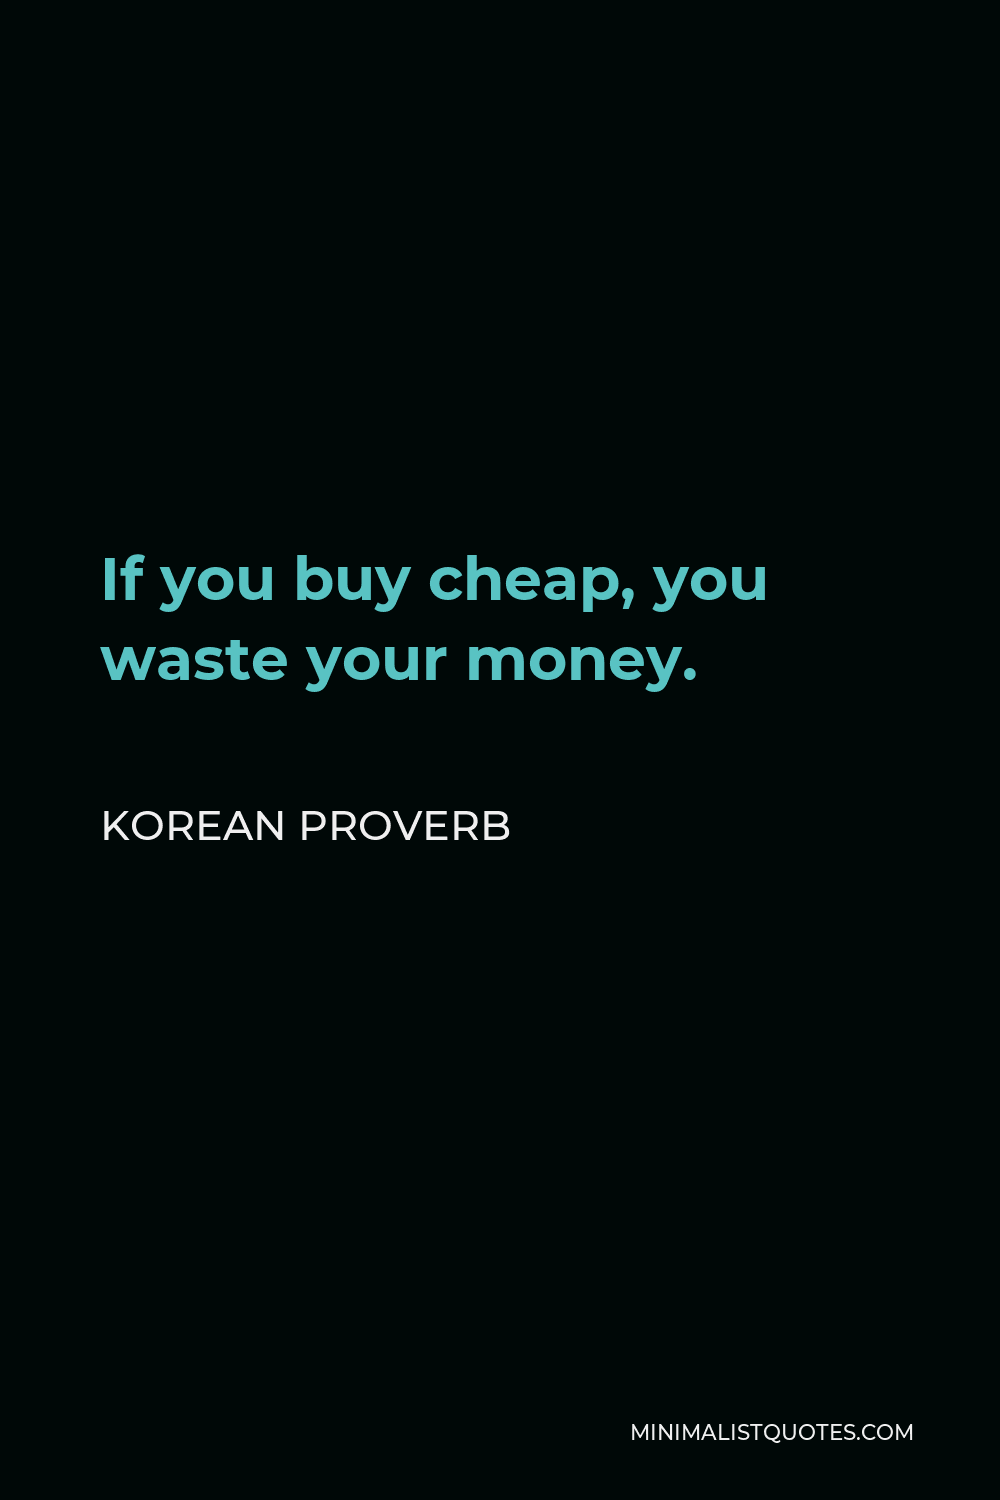 Korean Proverb Quote - If you buy cheap, you waste your money.